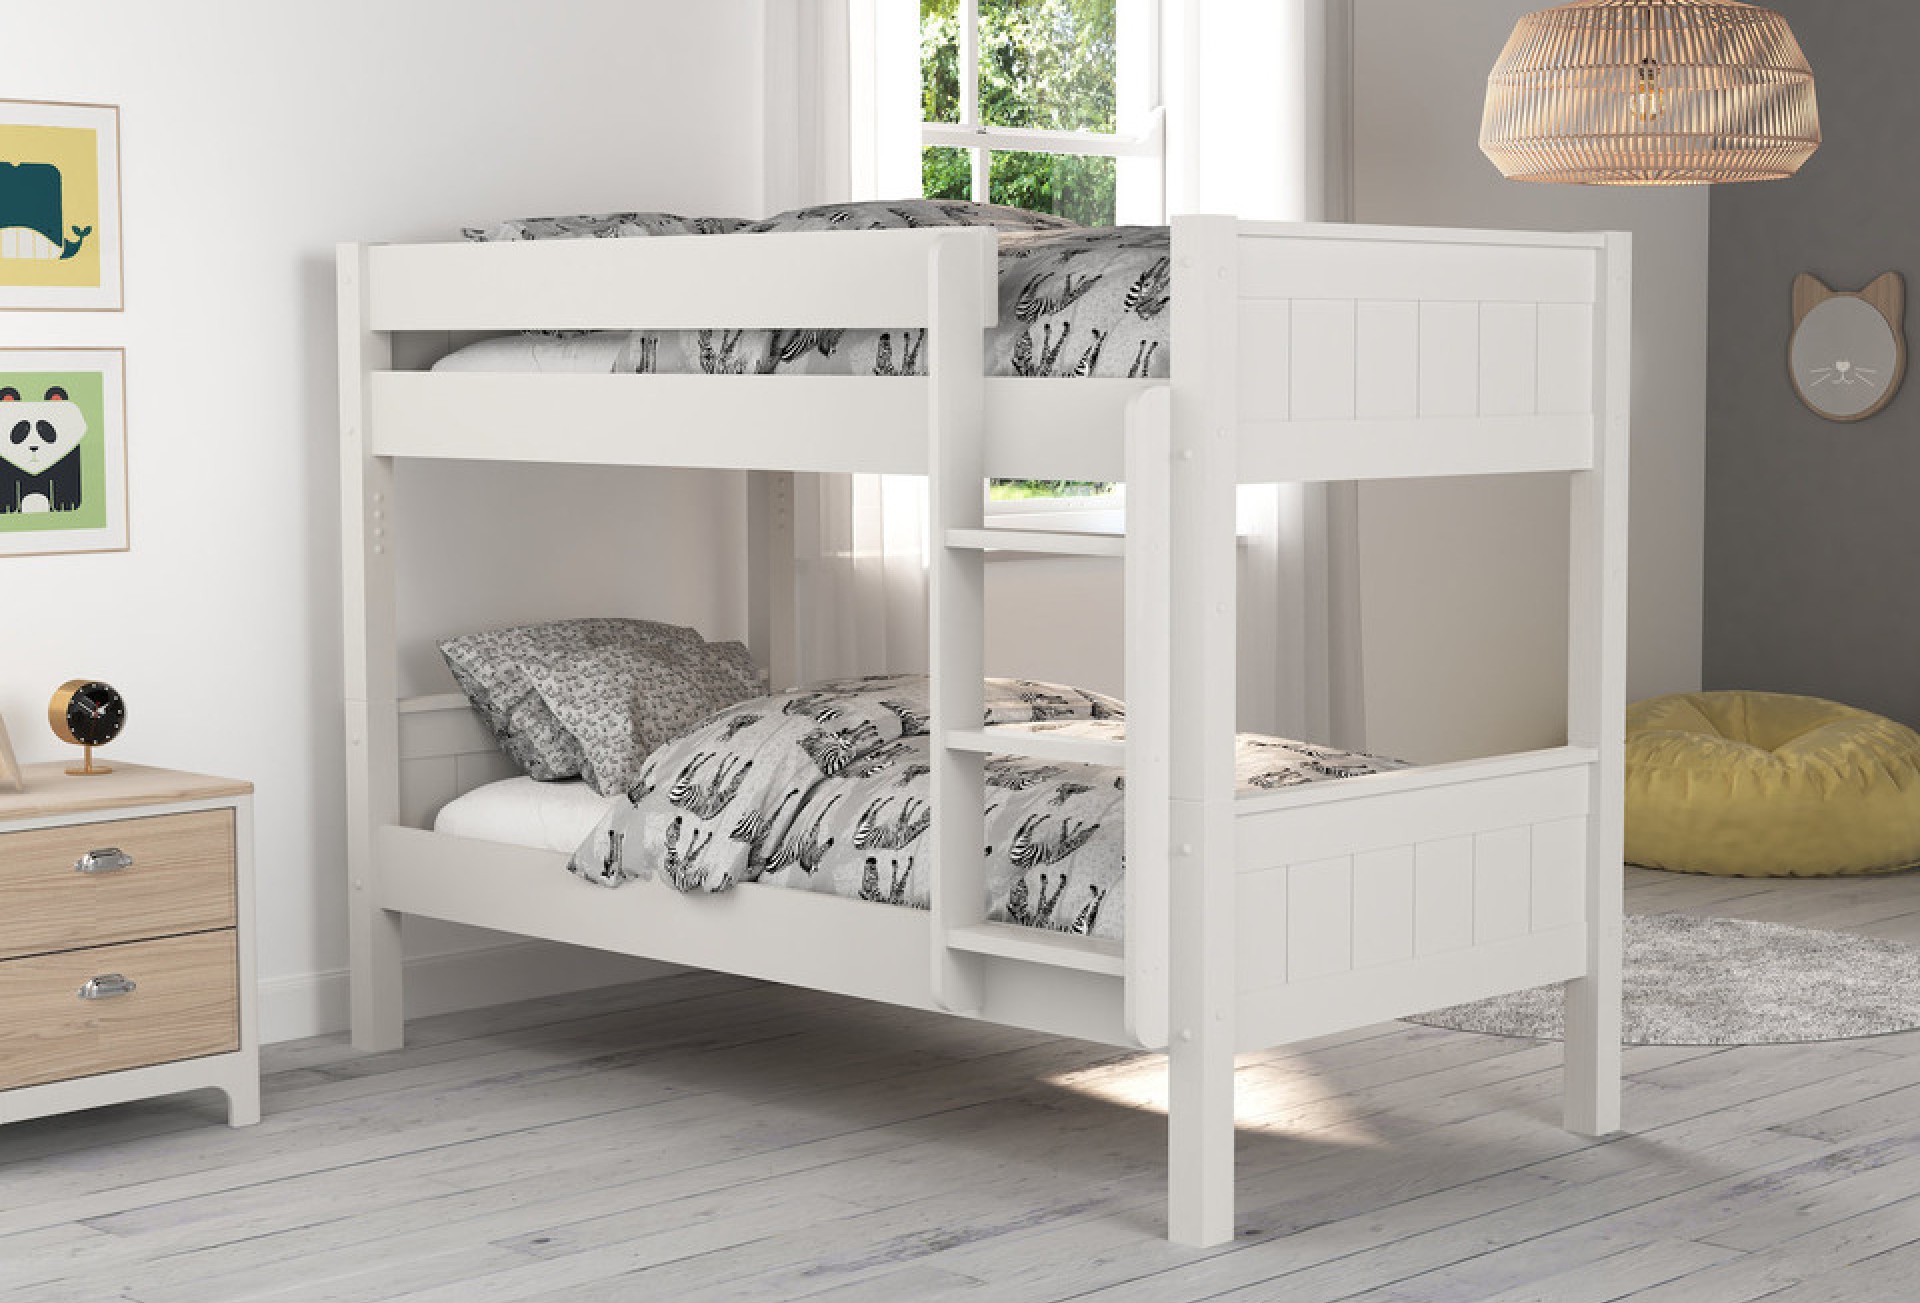 Meadow kids' compact white wooden bunk bed set in a contemporary child's bedroom